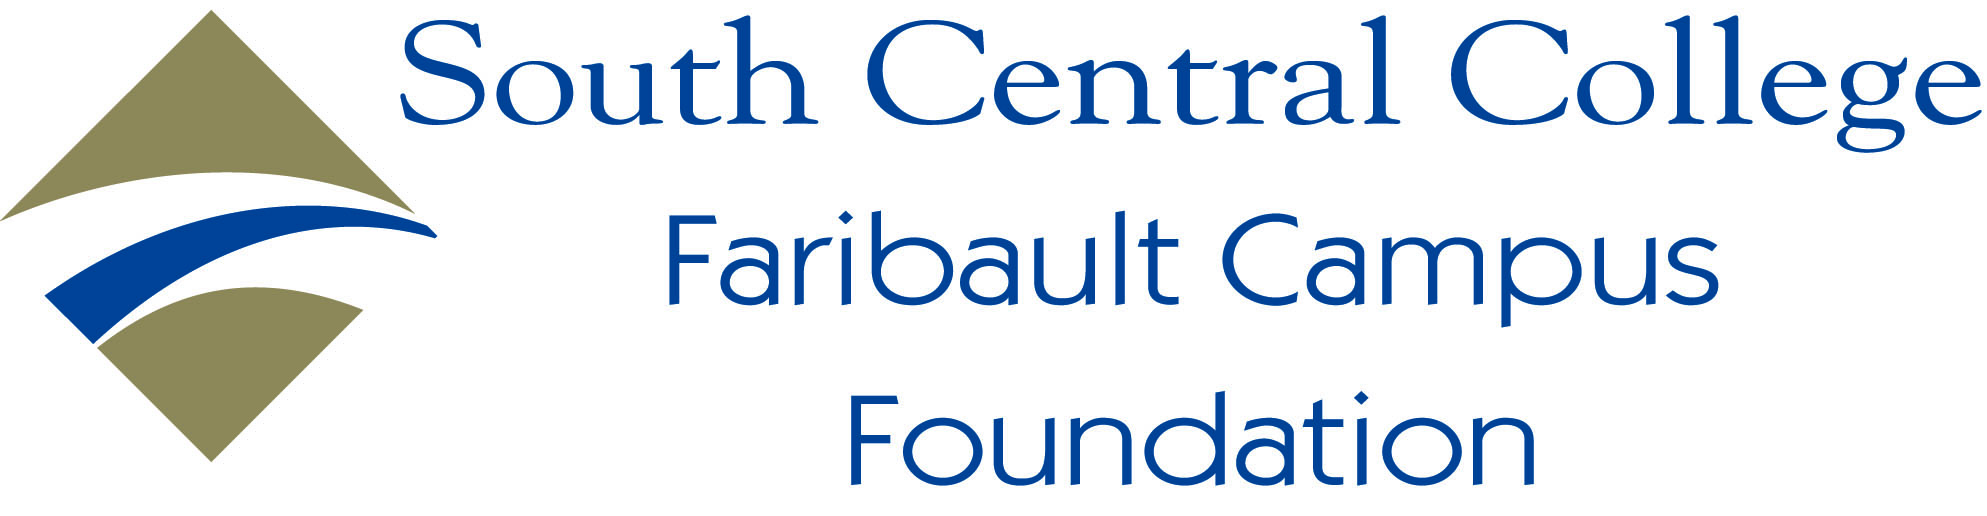 South Central College Faribault Campus Foundation